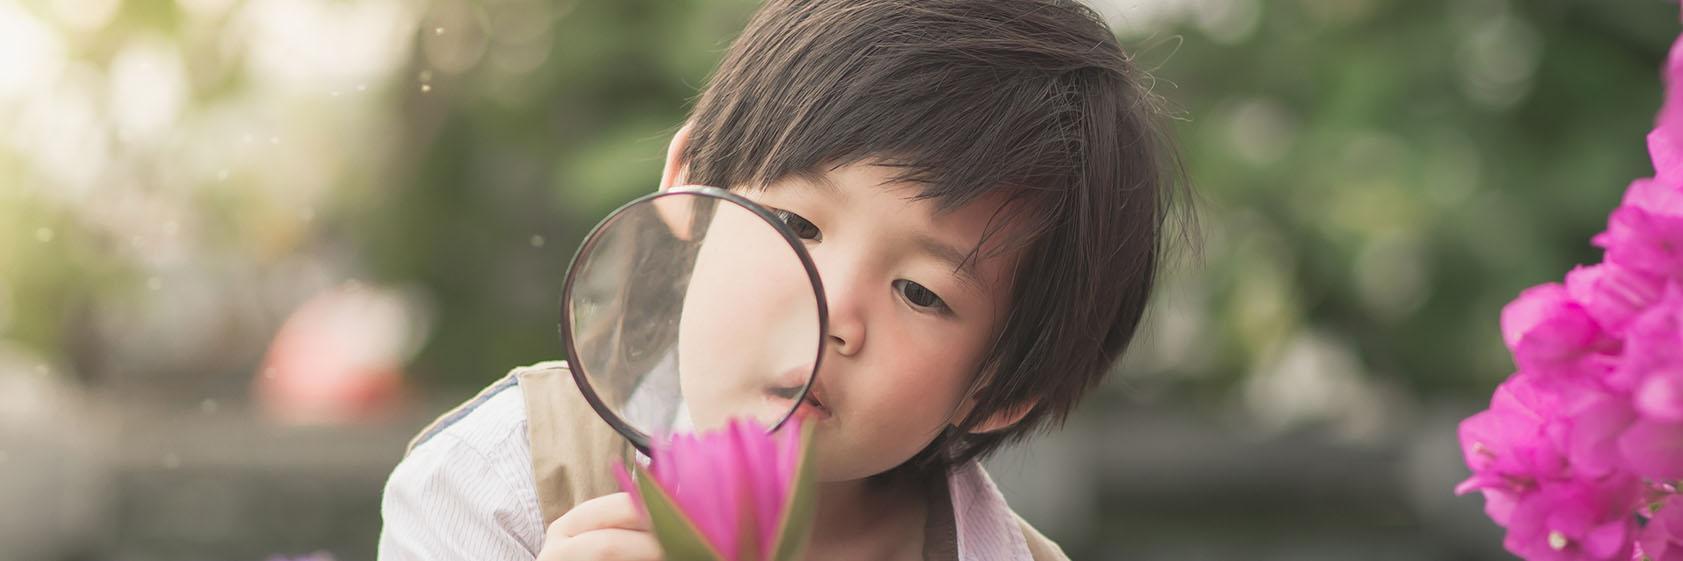 background image. Child with magnifying glass